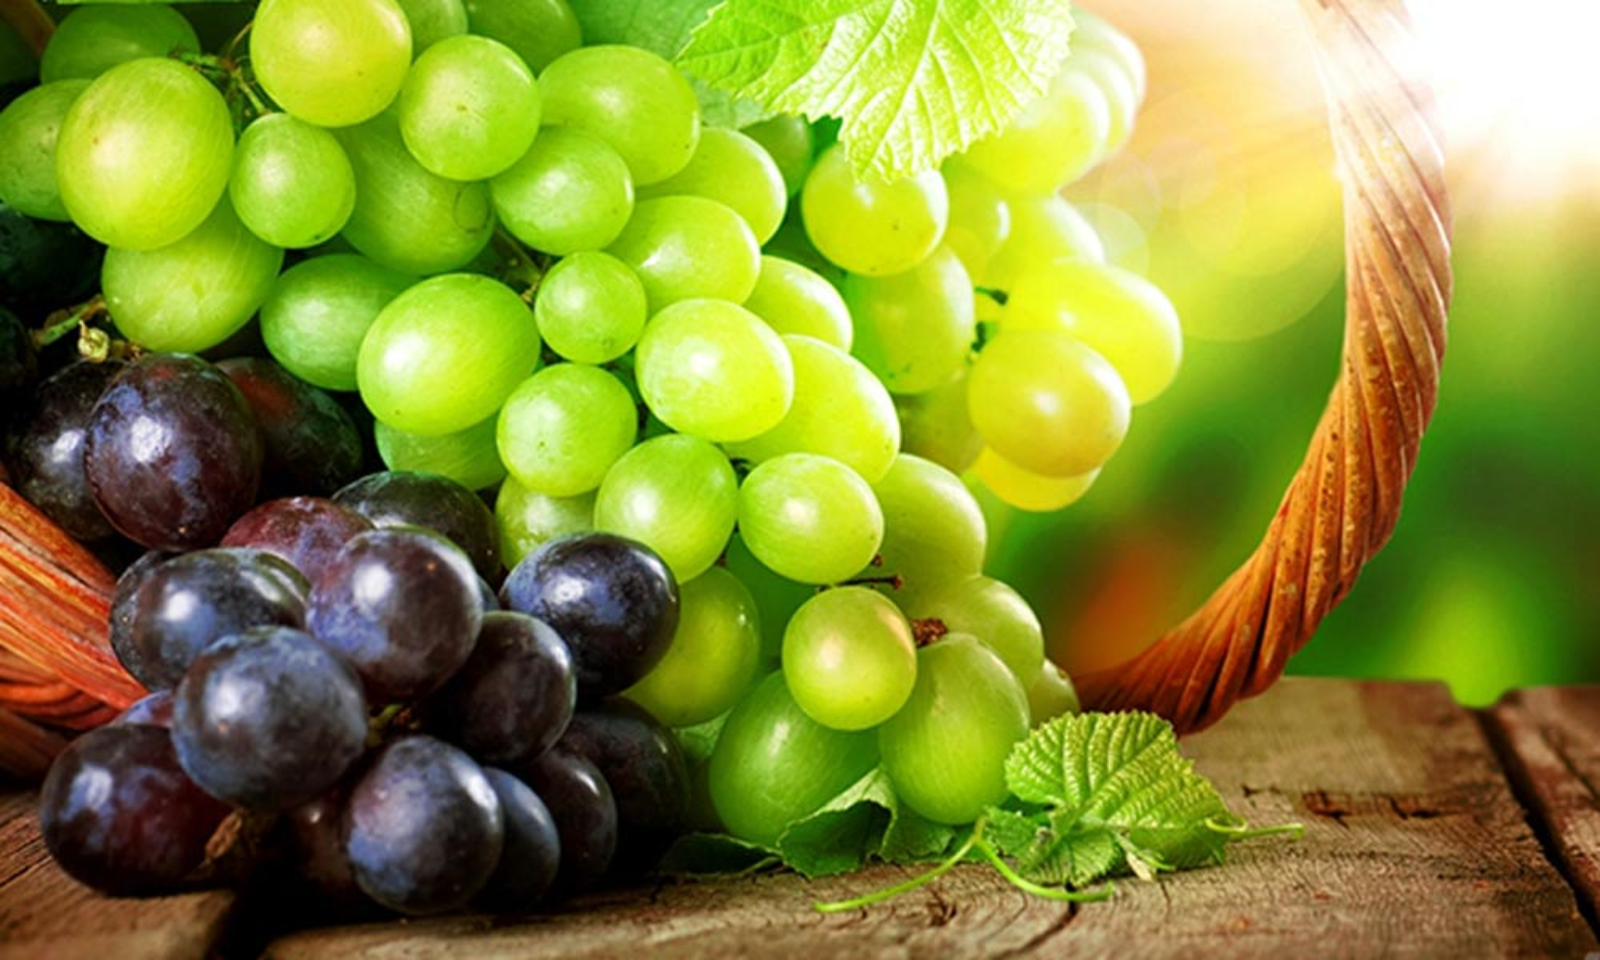 Why a grape is called Queen of Fruits?